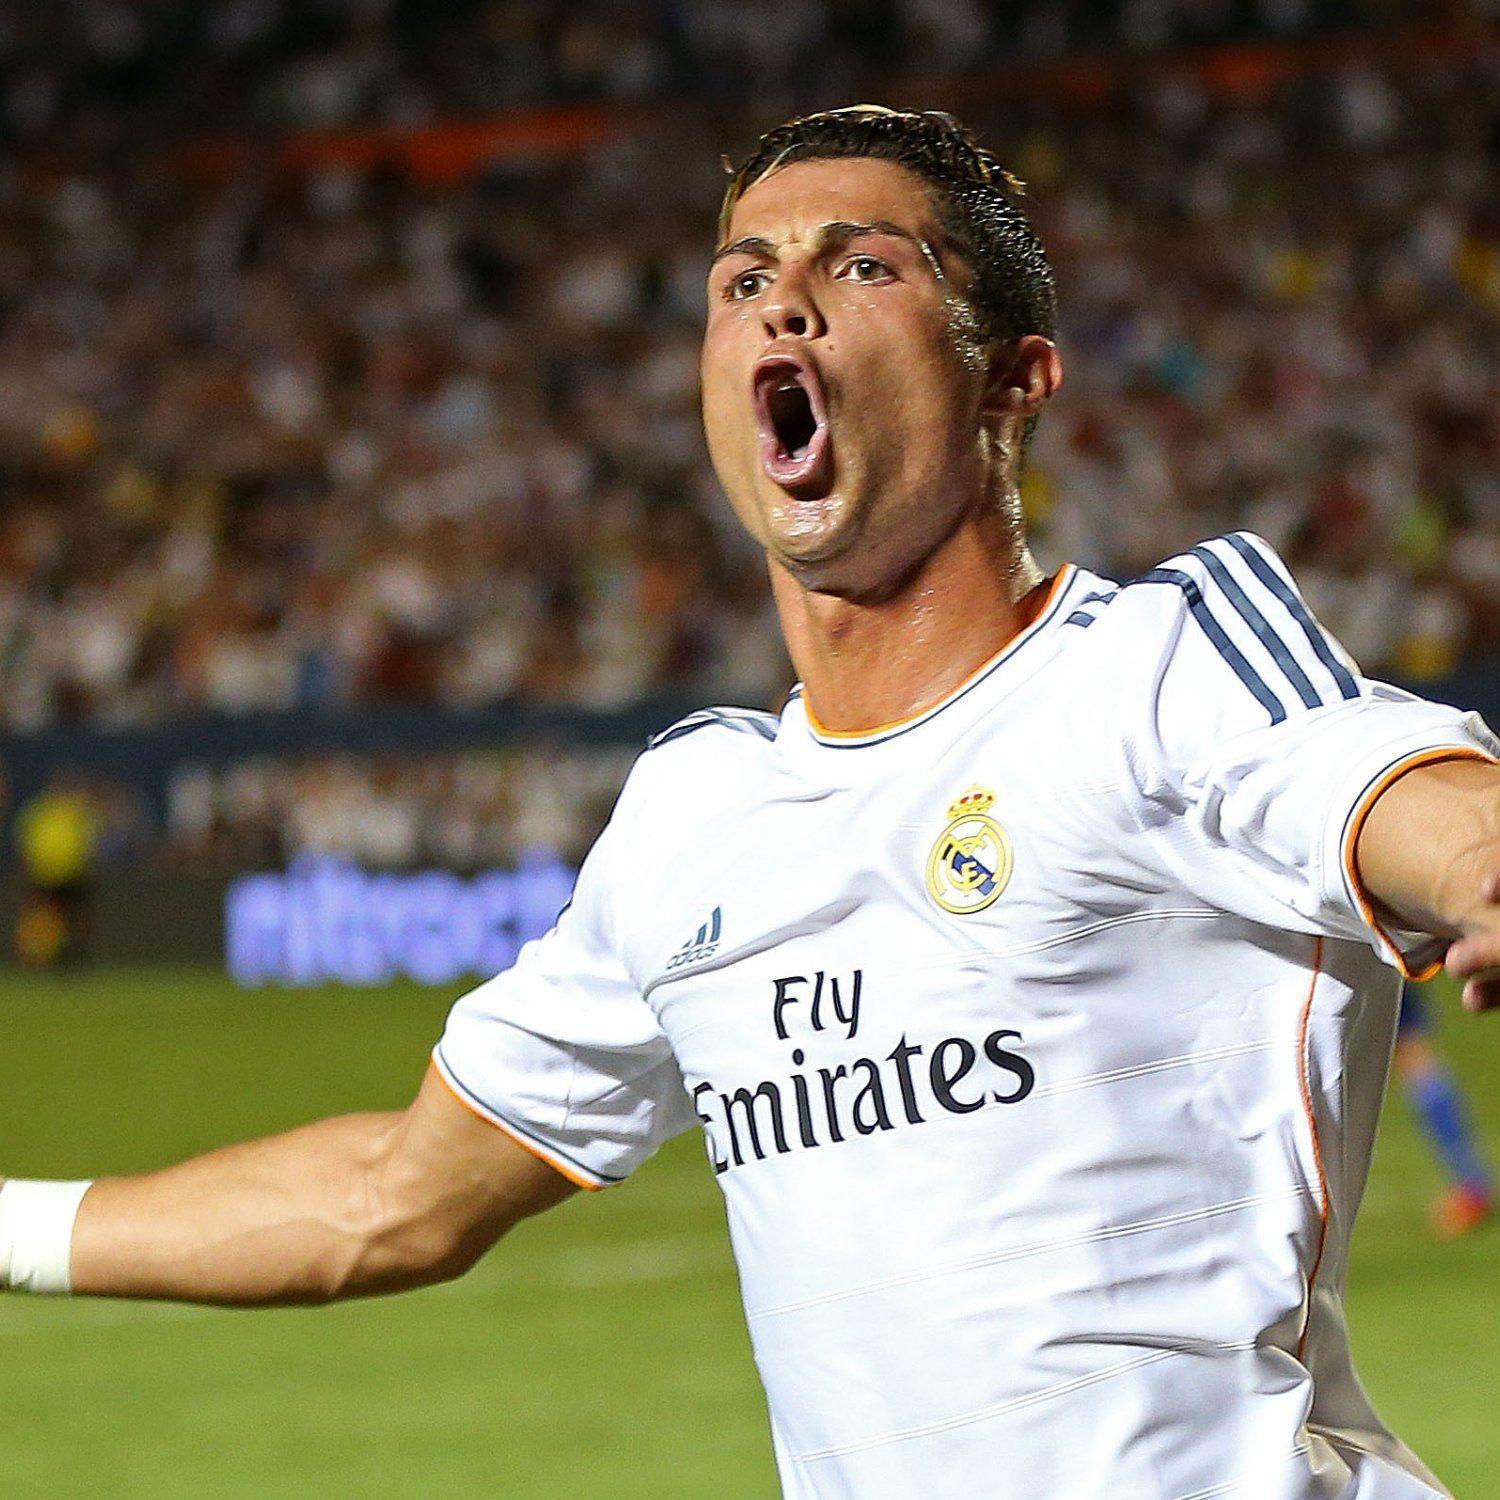 Cr7 Real Madrid 2014 wallpaper HD for desktop, android